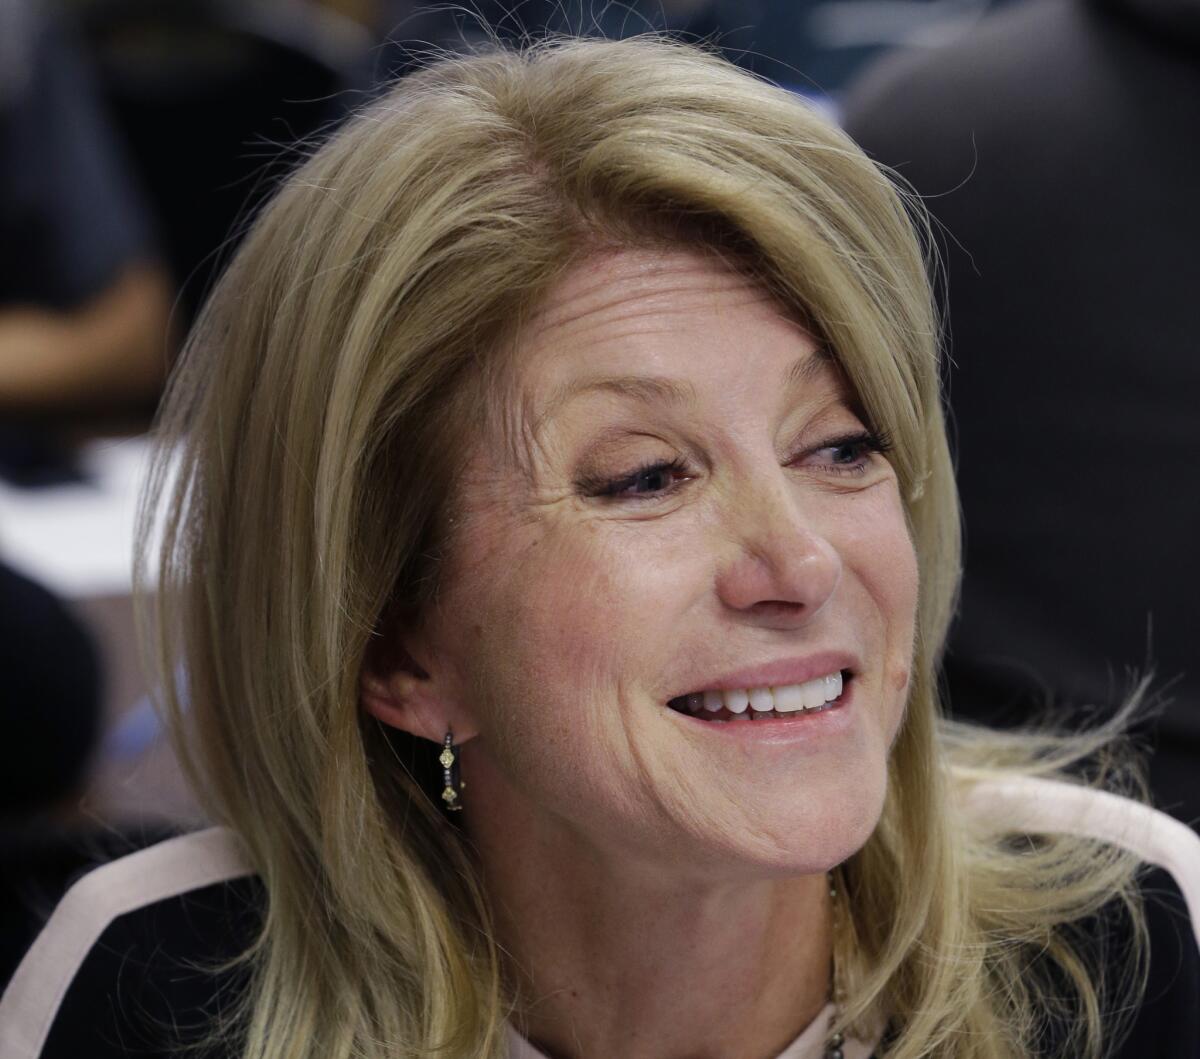 Texas State Sen. Wendy Davis won't get help in her gubernatorial campaign from the Democratic Governors Assn.